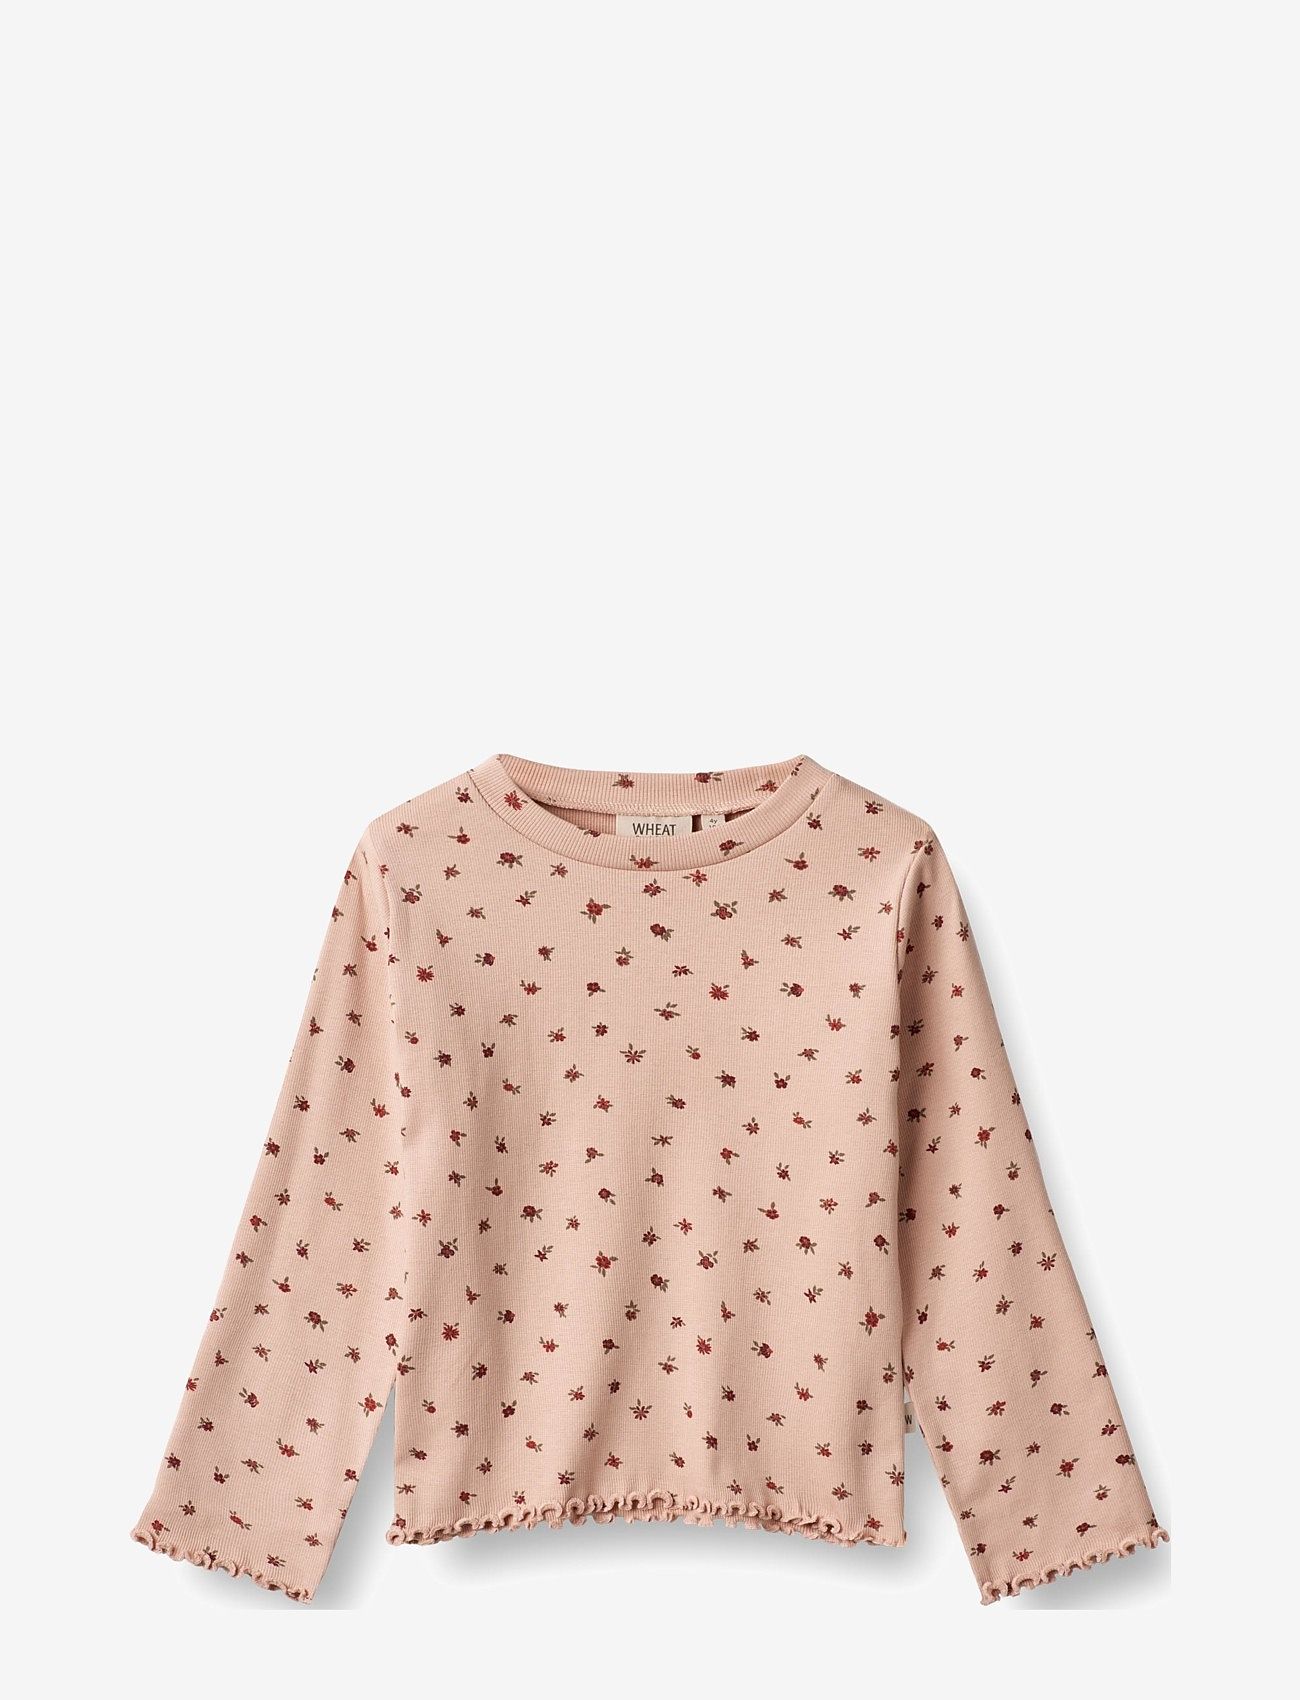 Wheat - T-Shirt Else - long-sleeved t-shirts - pink sand flowers - 0